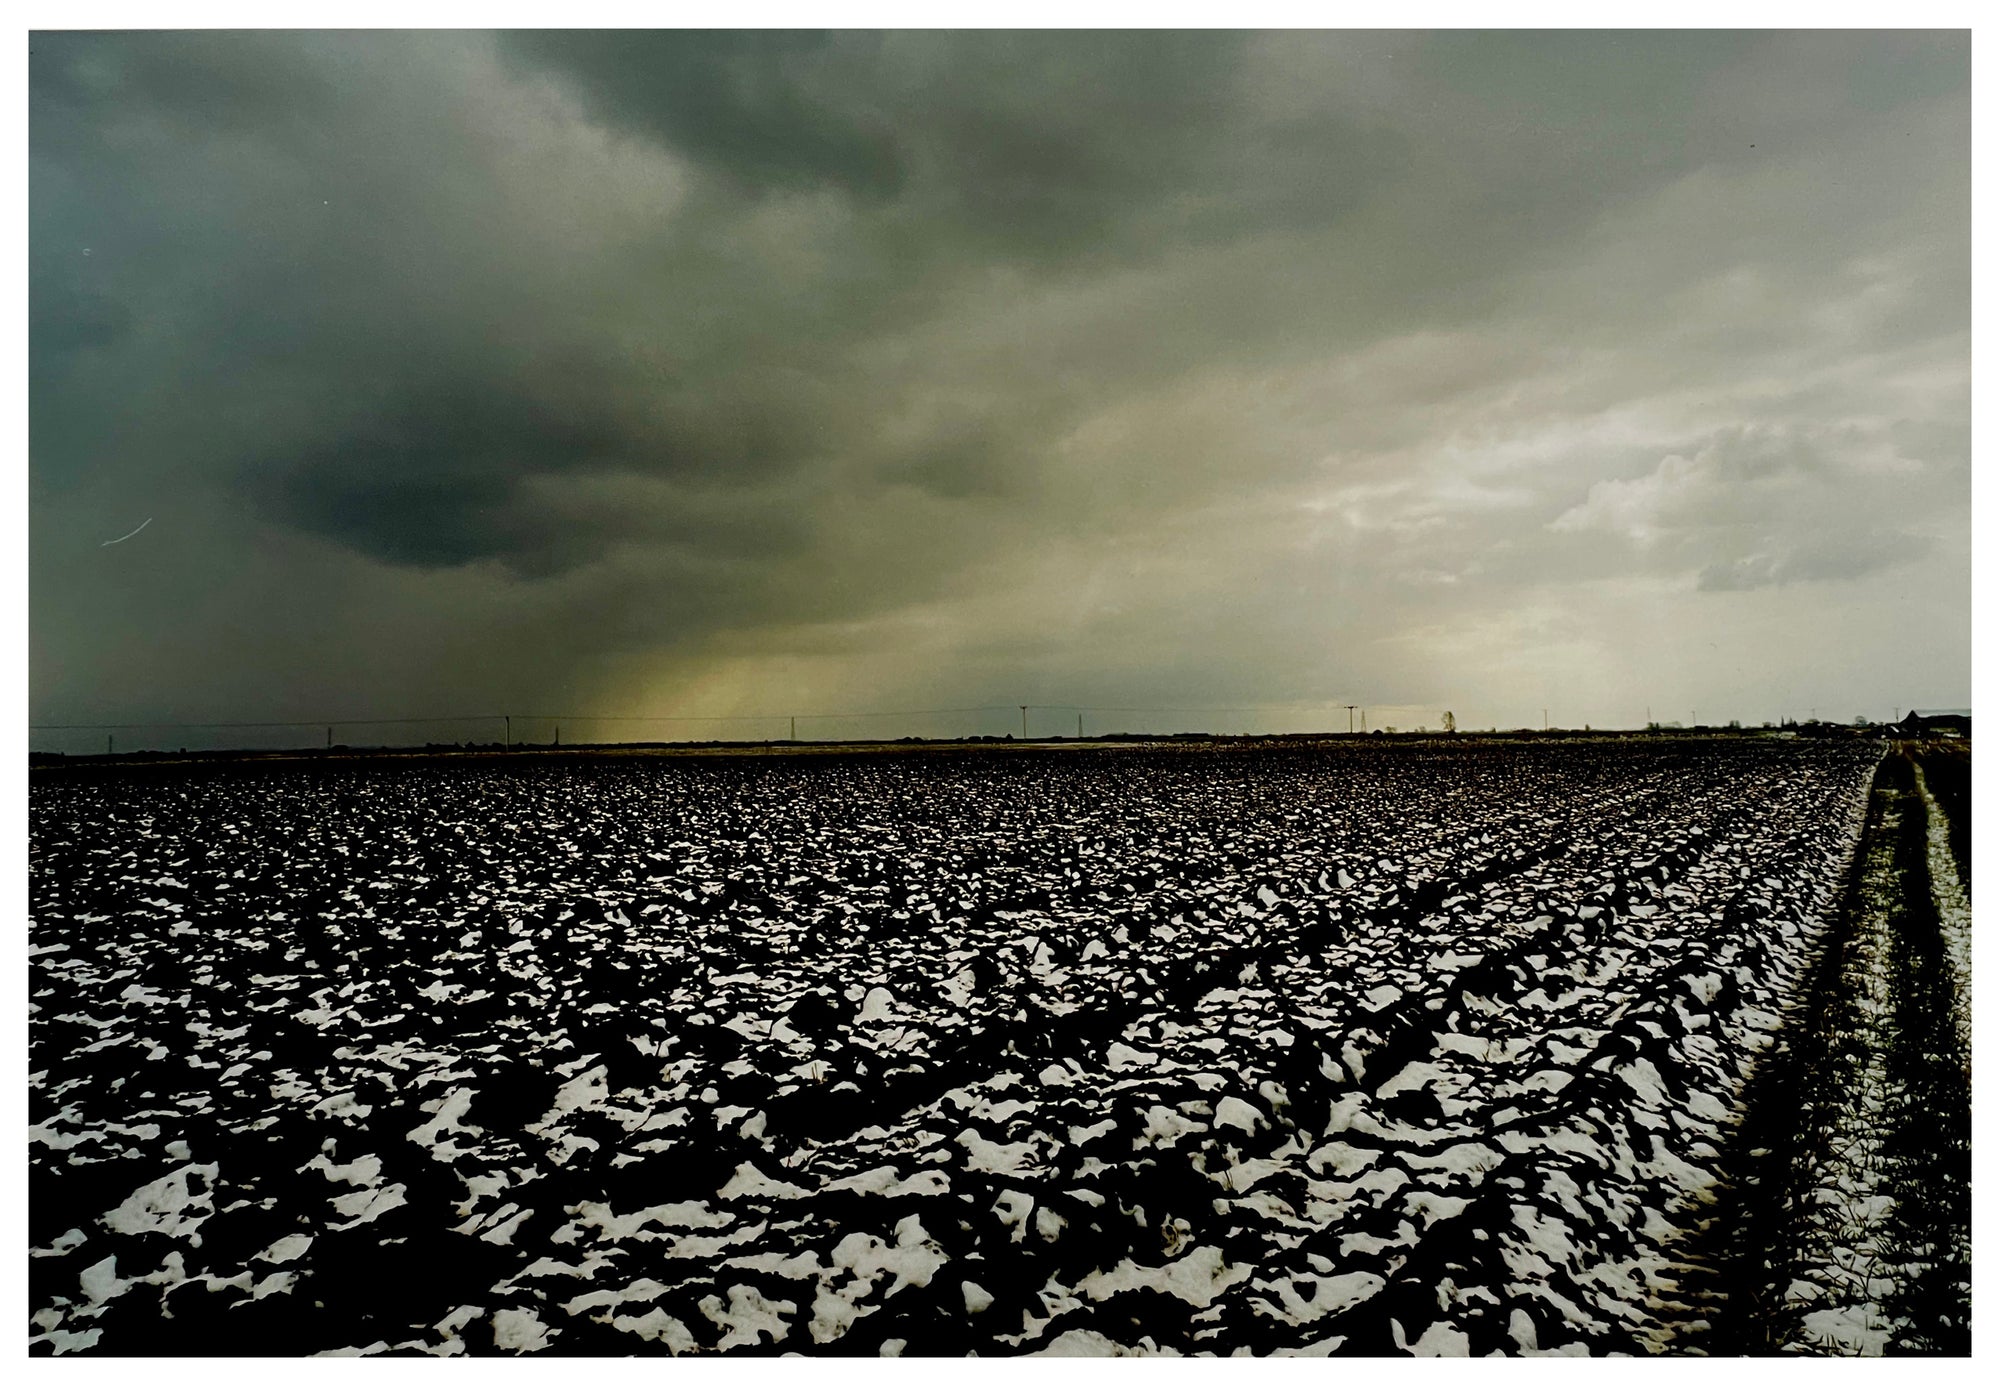 Photograph by Richard Heeps.  A snow covered, deeply trenched, peat fields sits below a thick cloud which is bringing in a storm.